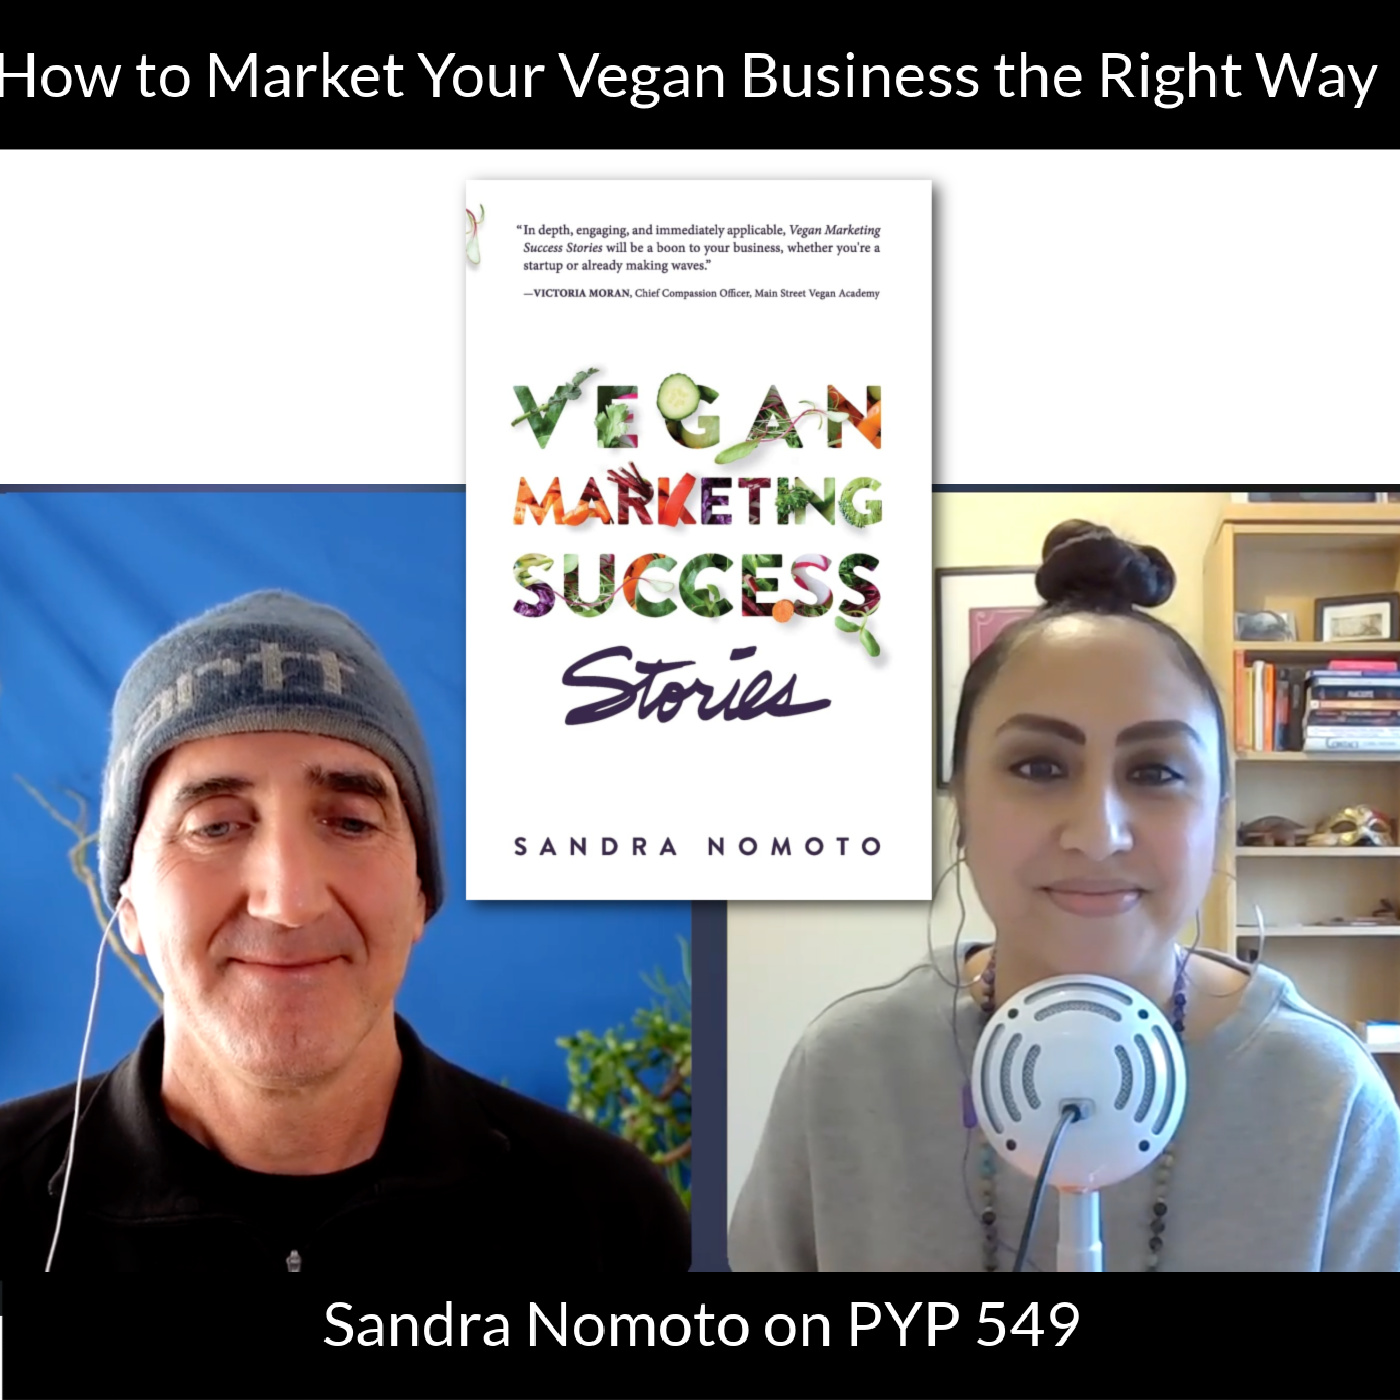 How to Market a Vegan Business the Right Way: Sandra Nomoto on PYP 549